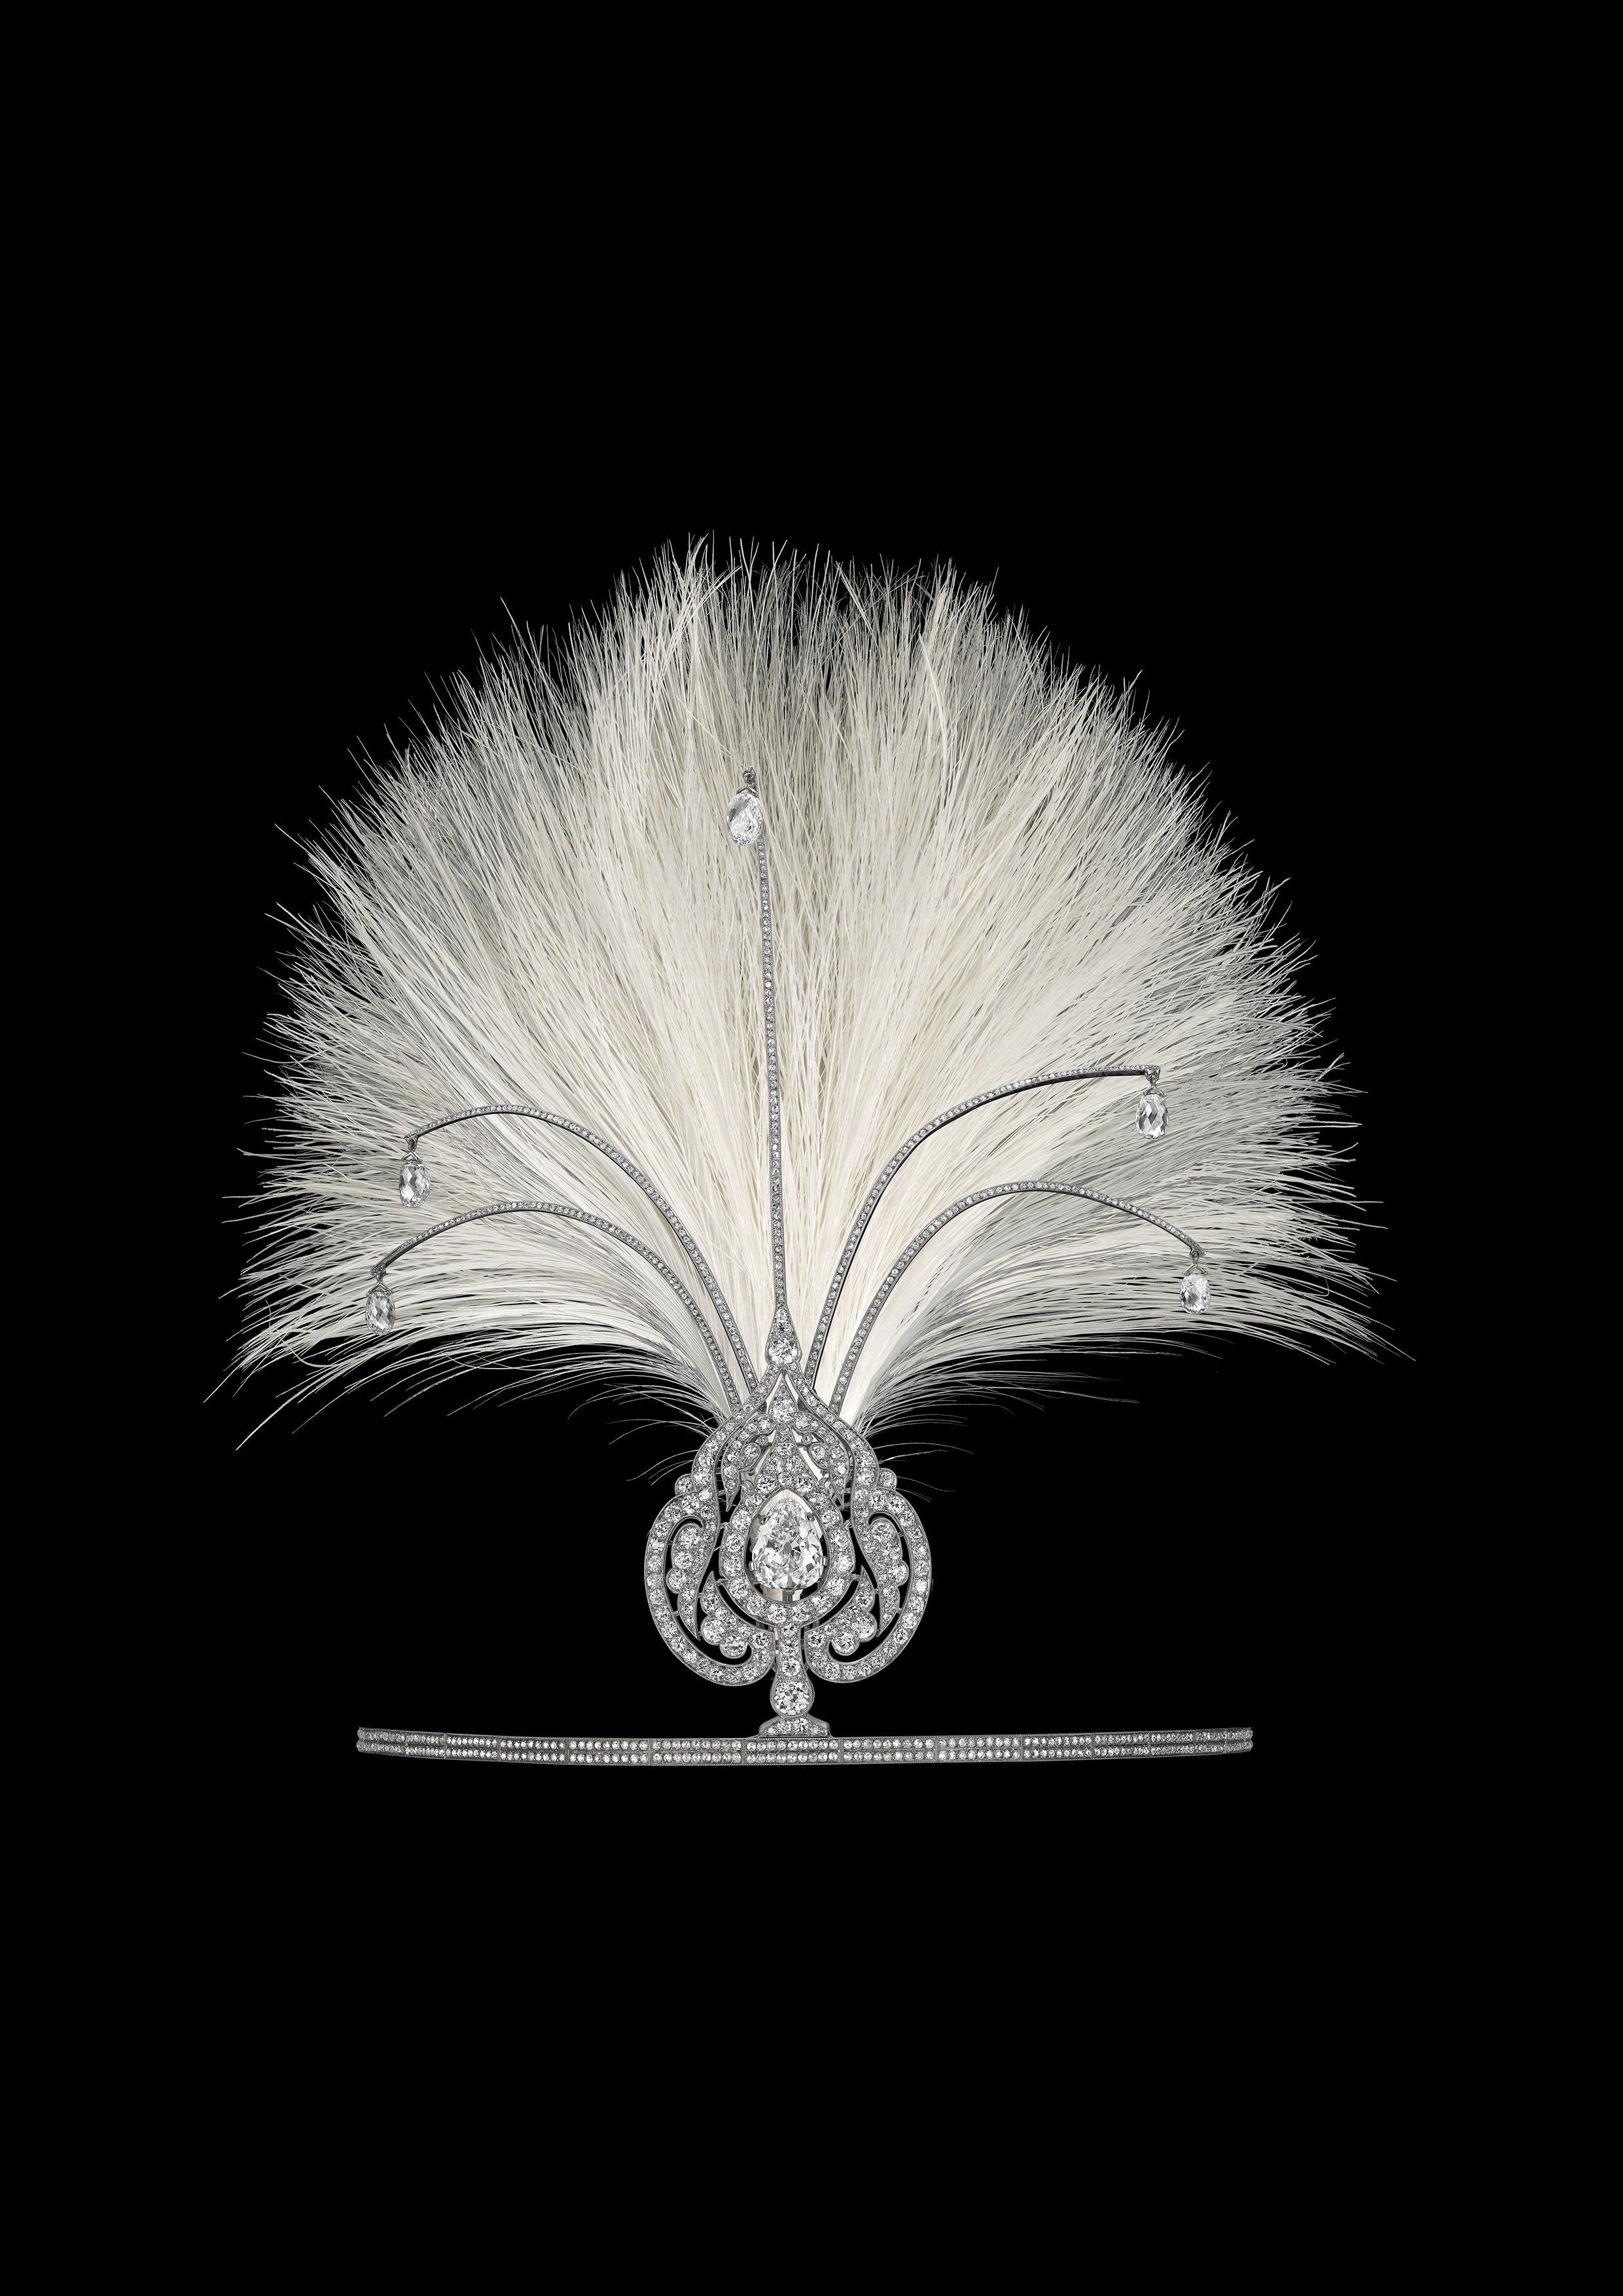 Head ornament, Cartier New York, circa 1924. Platinum, white gold, pink gold, one 4.01-carat pear-shaped diamond, five briolette-cut diamonds weighing 5.22 carats in total, round old-, single- and rose-cut diamonds, feathers, millegrain setting. Cartier Collection. Marian Gerard, Cartier Collection © Cartier 